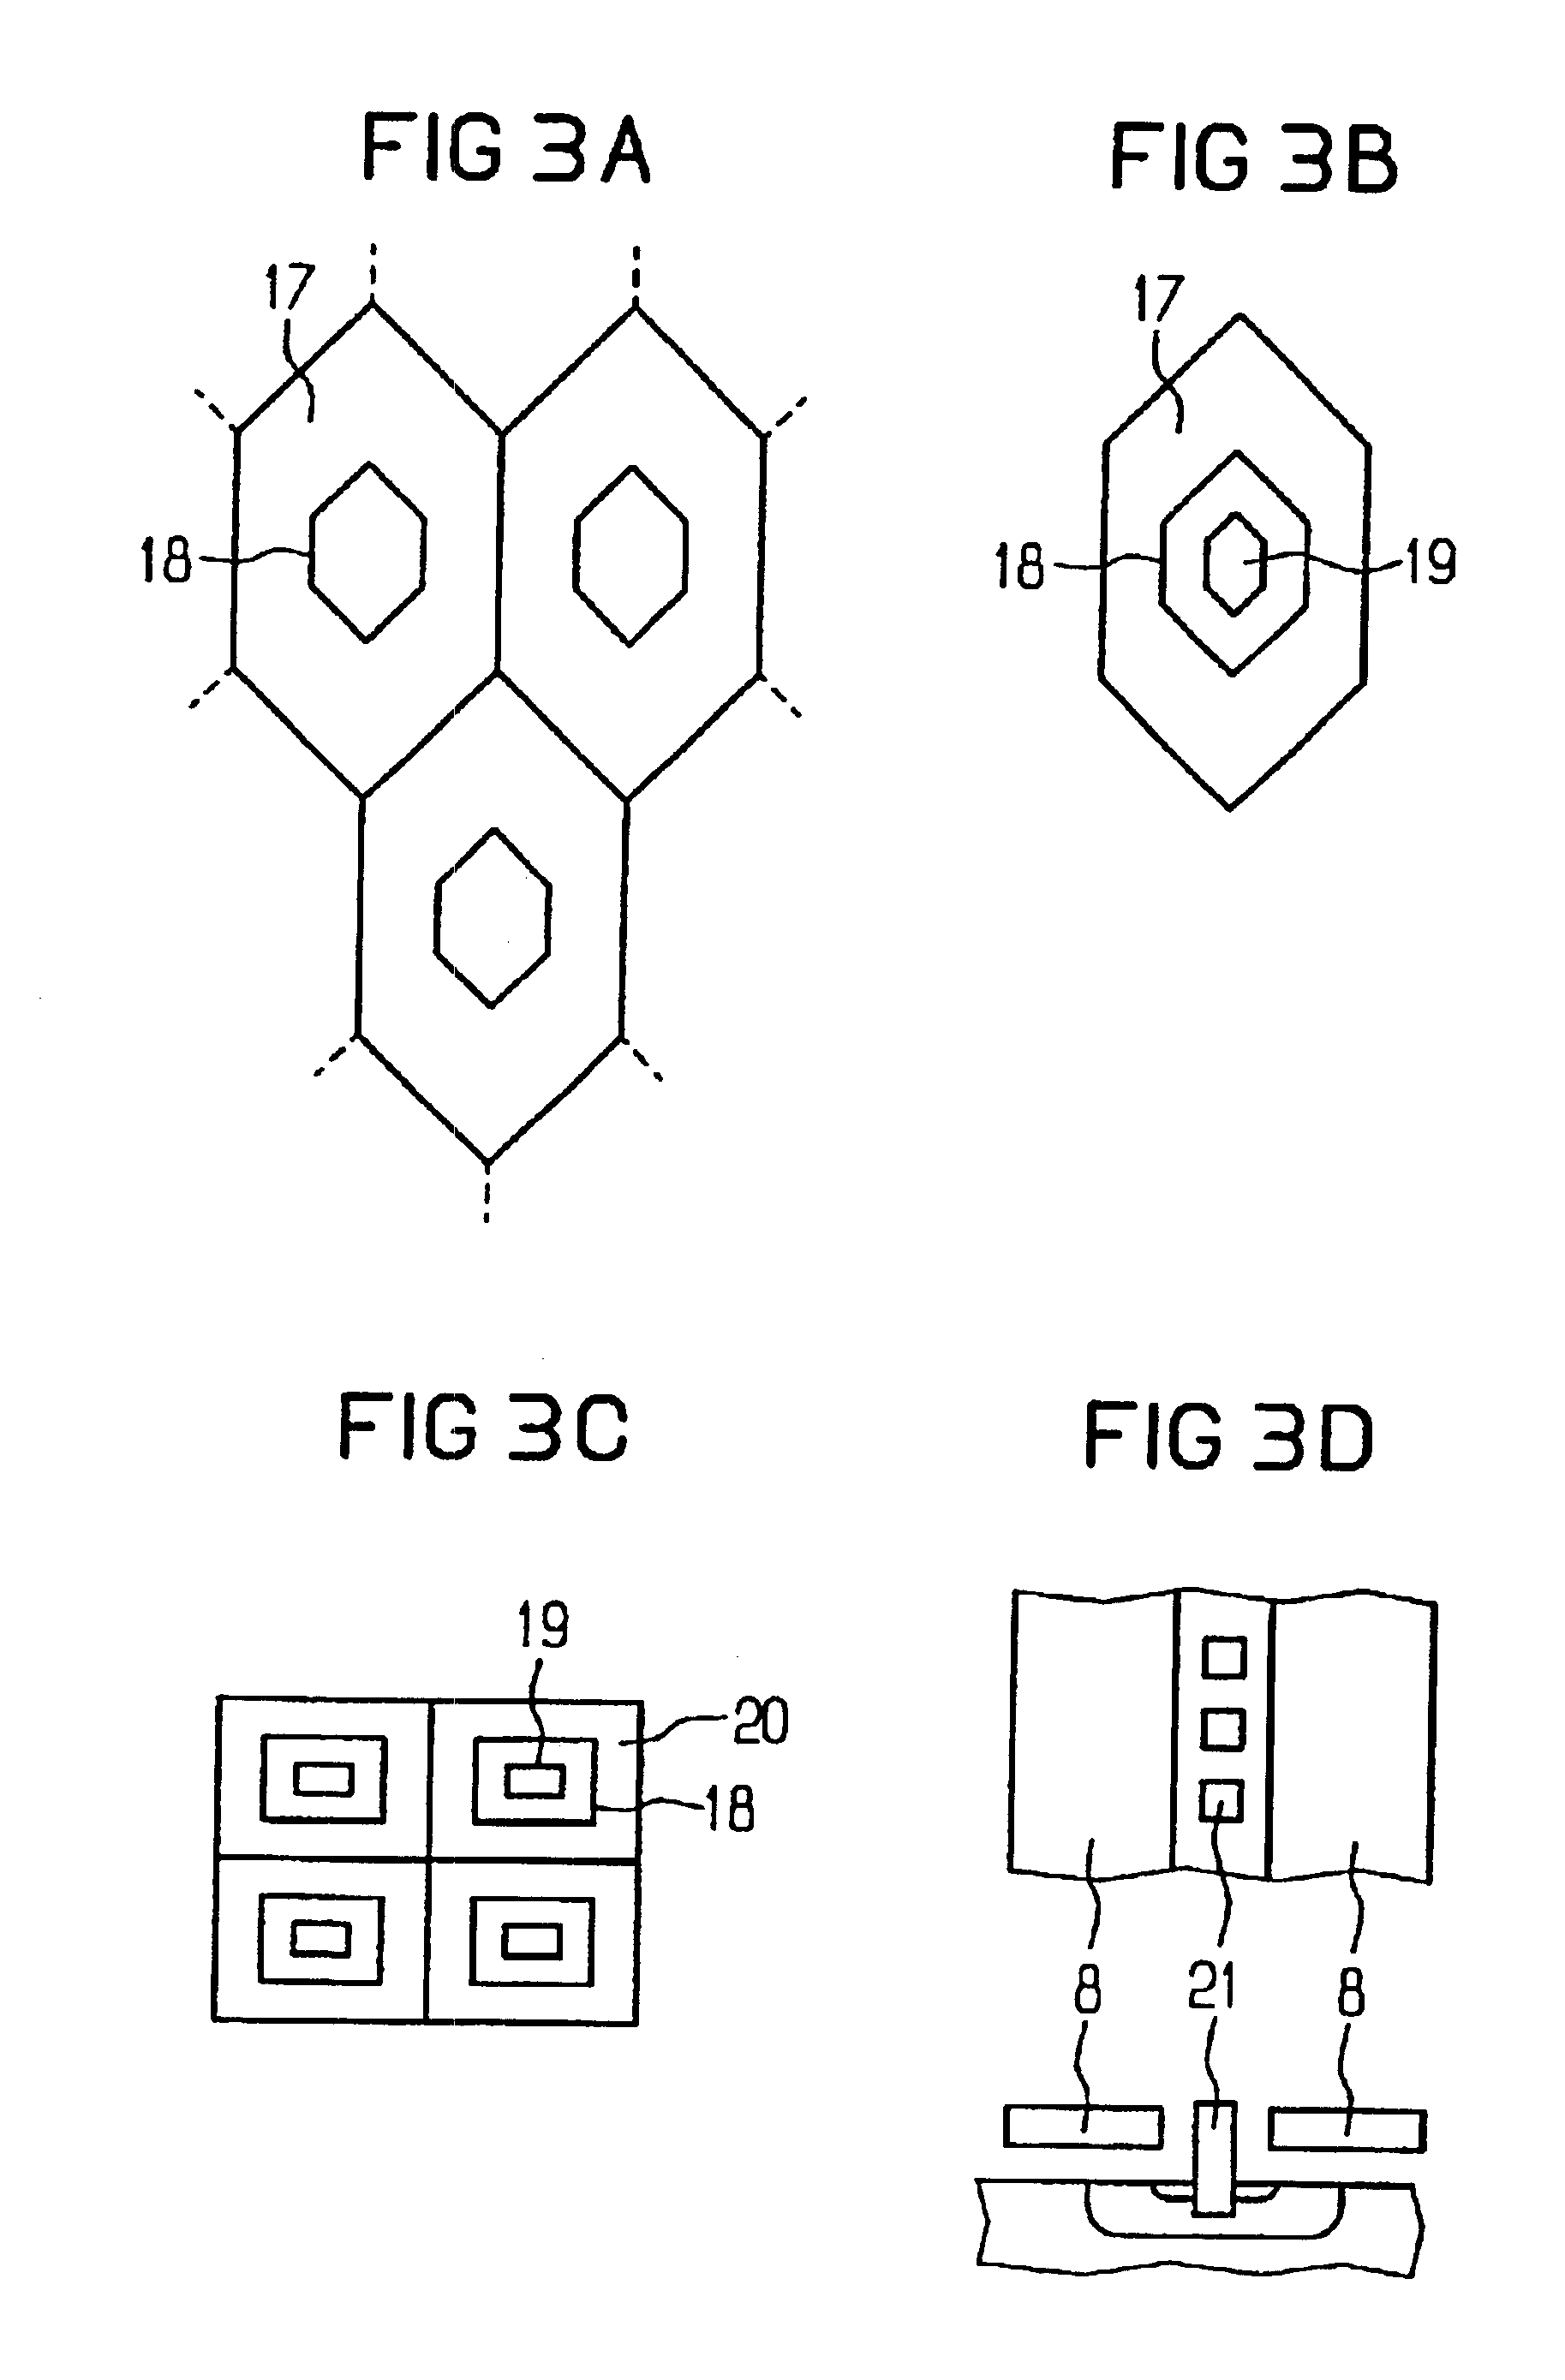 High-voltage semiconductor component